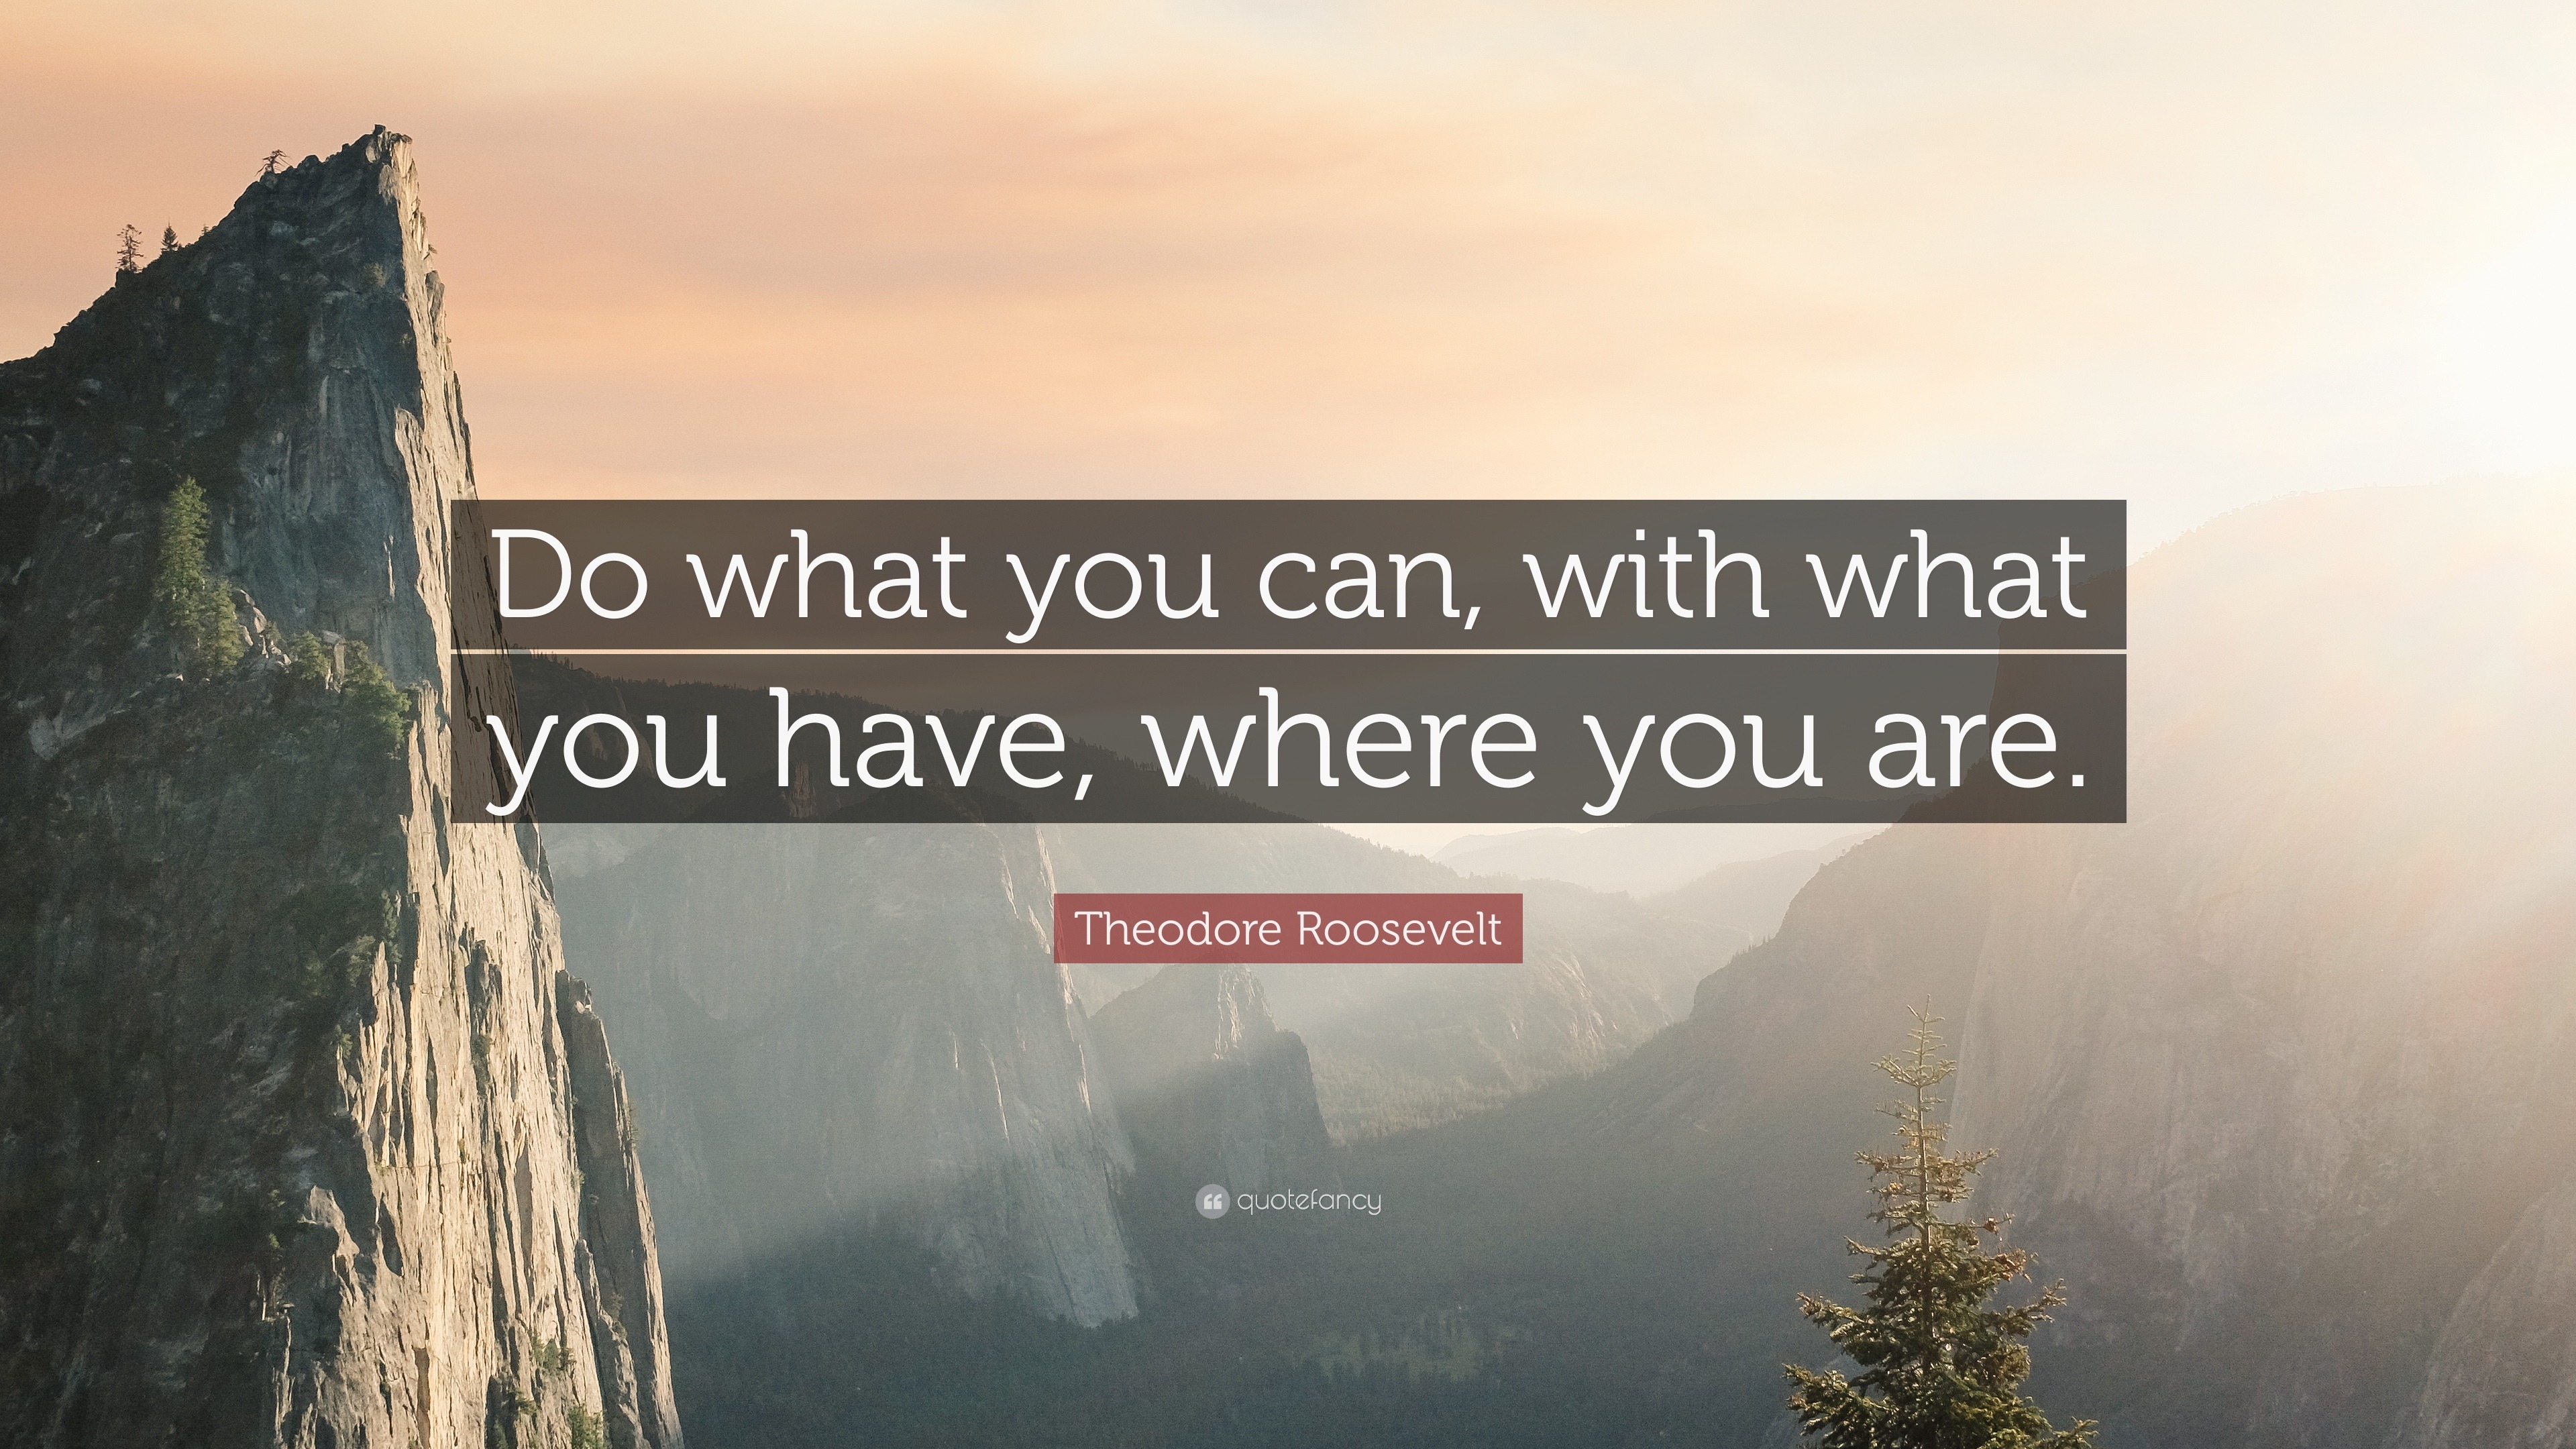 Theodore Roosevelt Quote Do What You Can With What You Have Where You Are